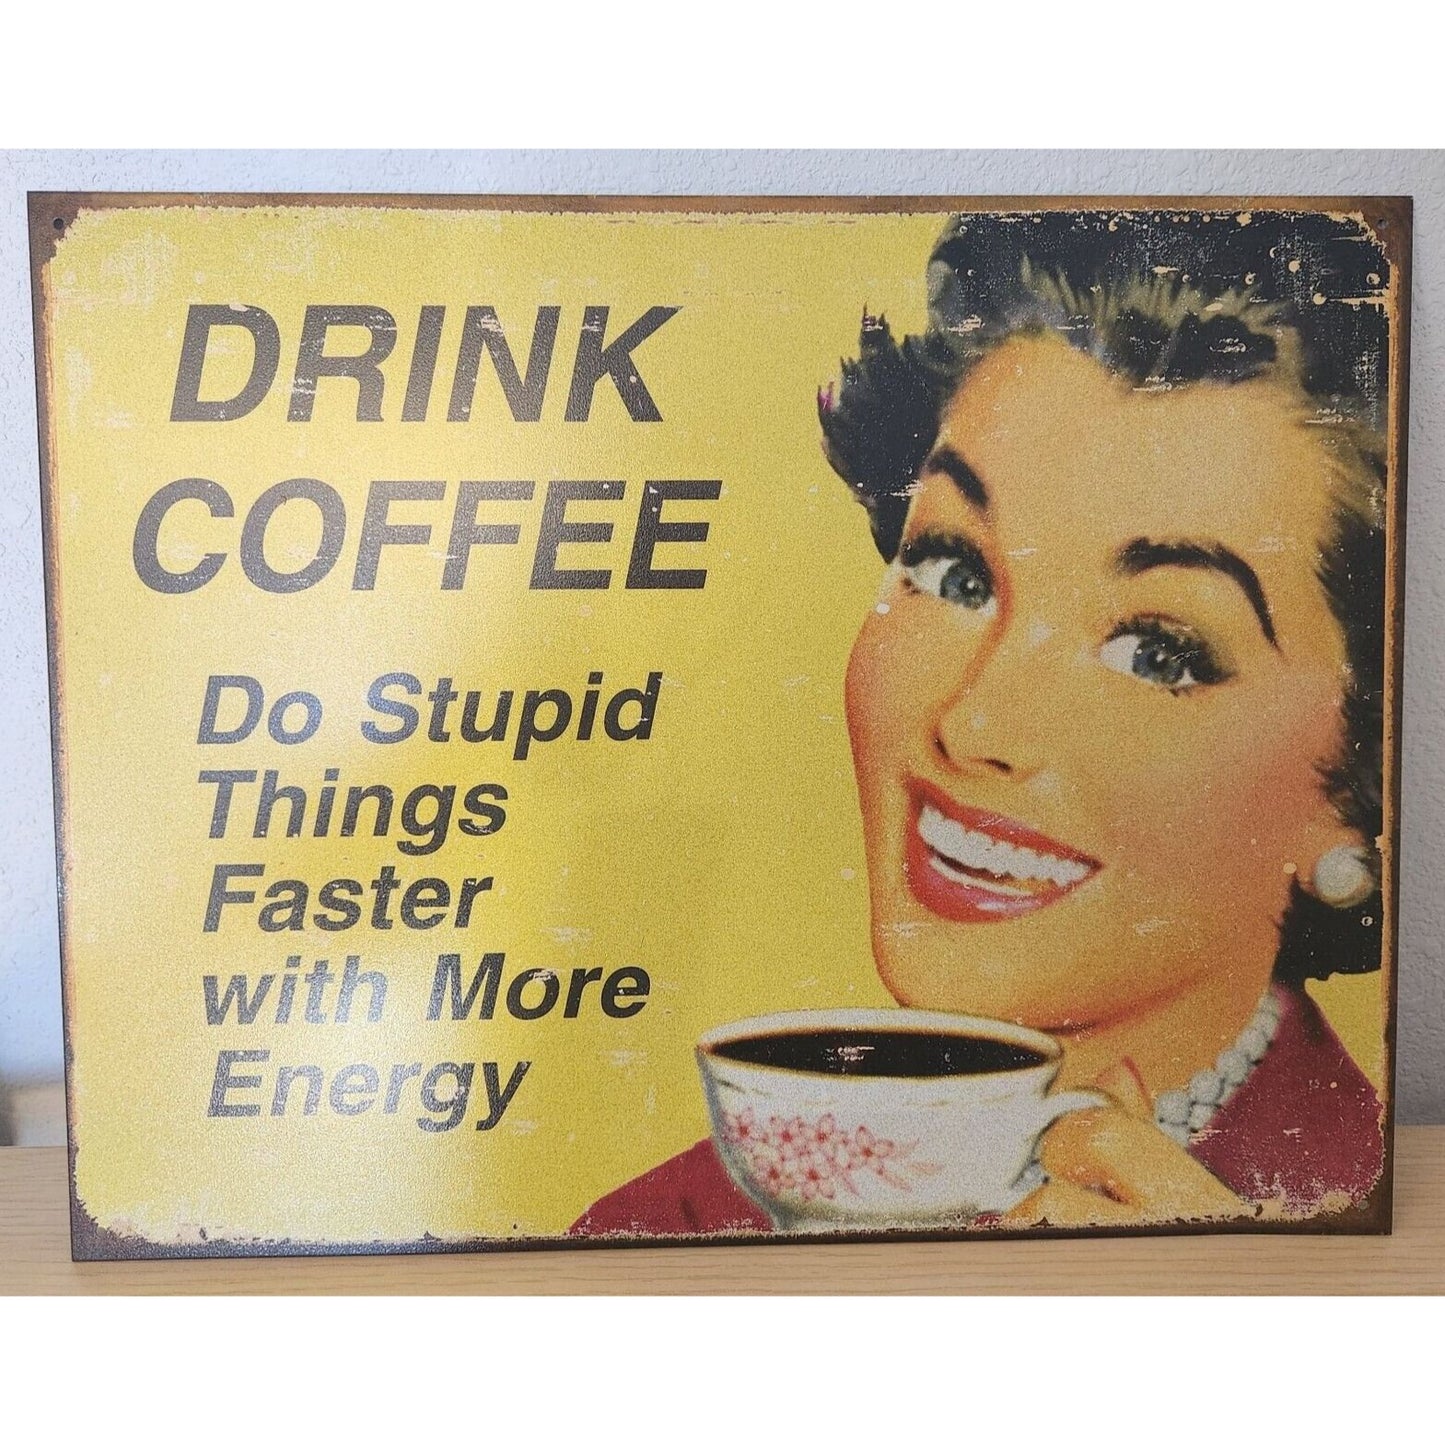 Metal Signs says " Drink Coffee Do Stupid Things Faster with More Energy"